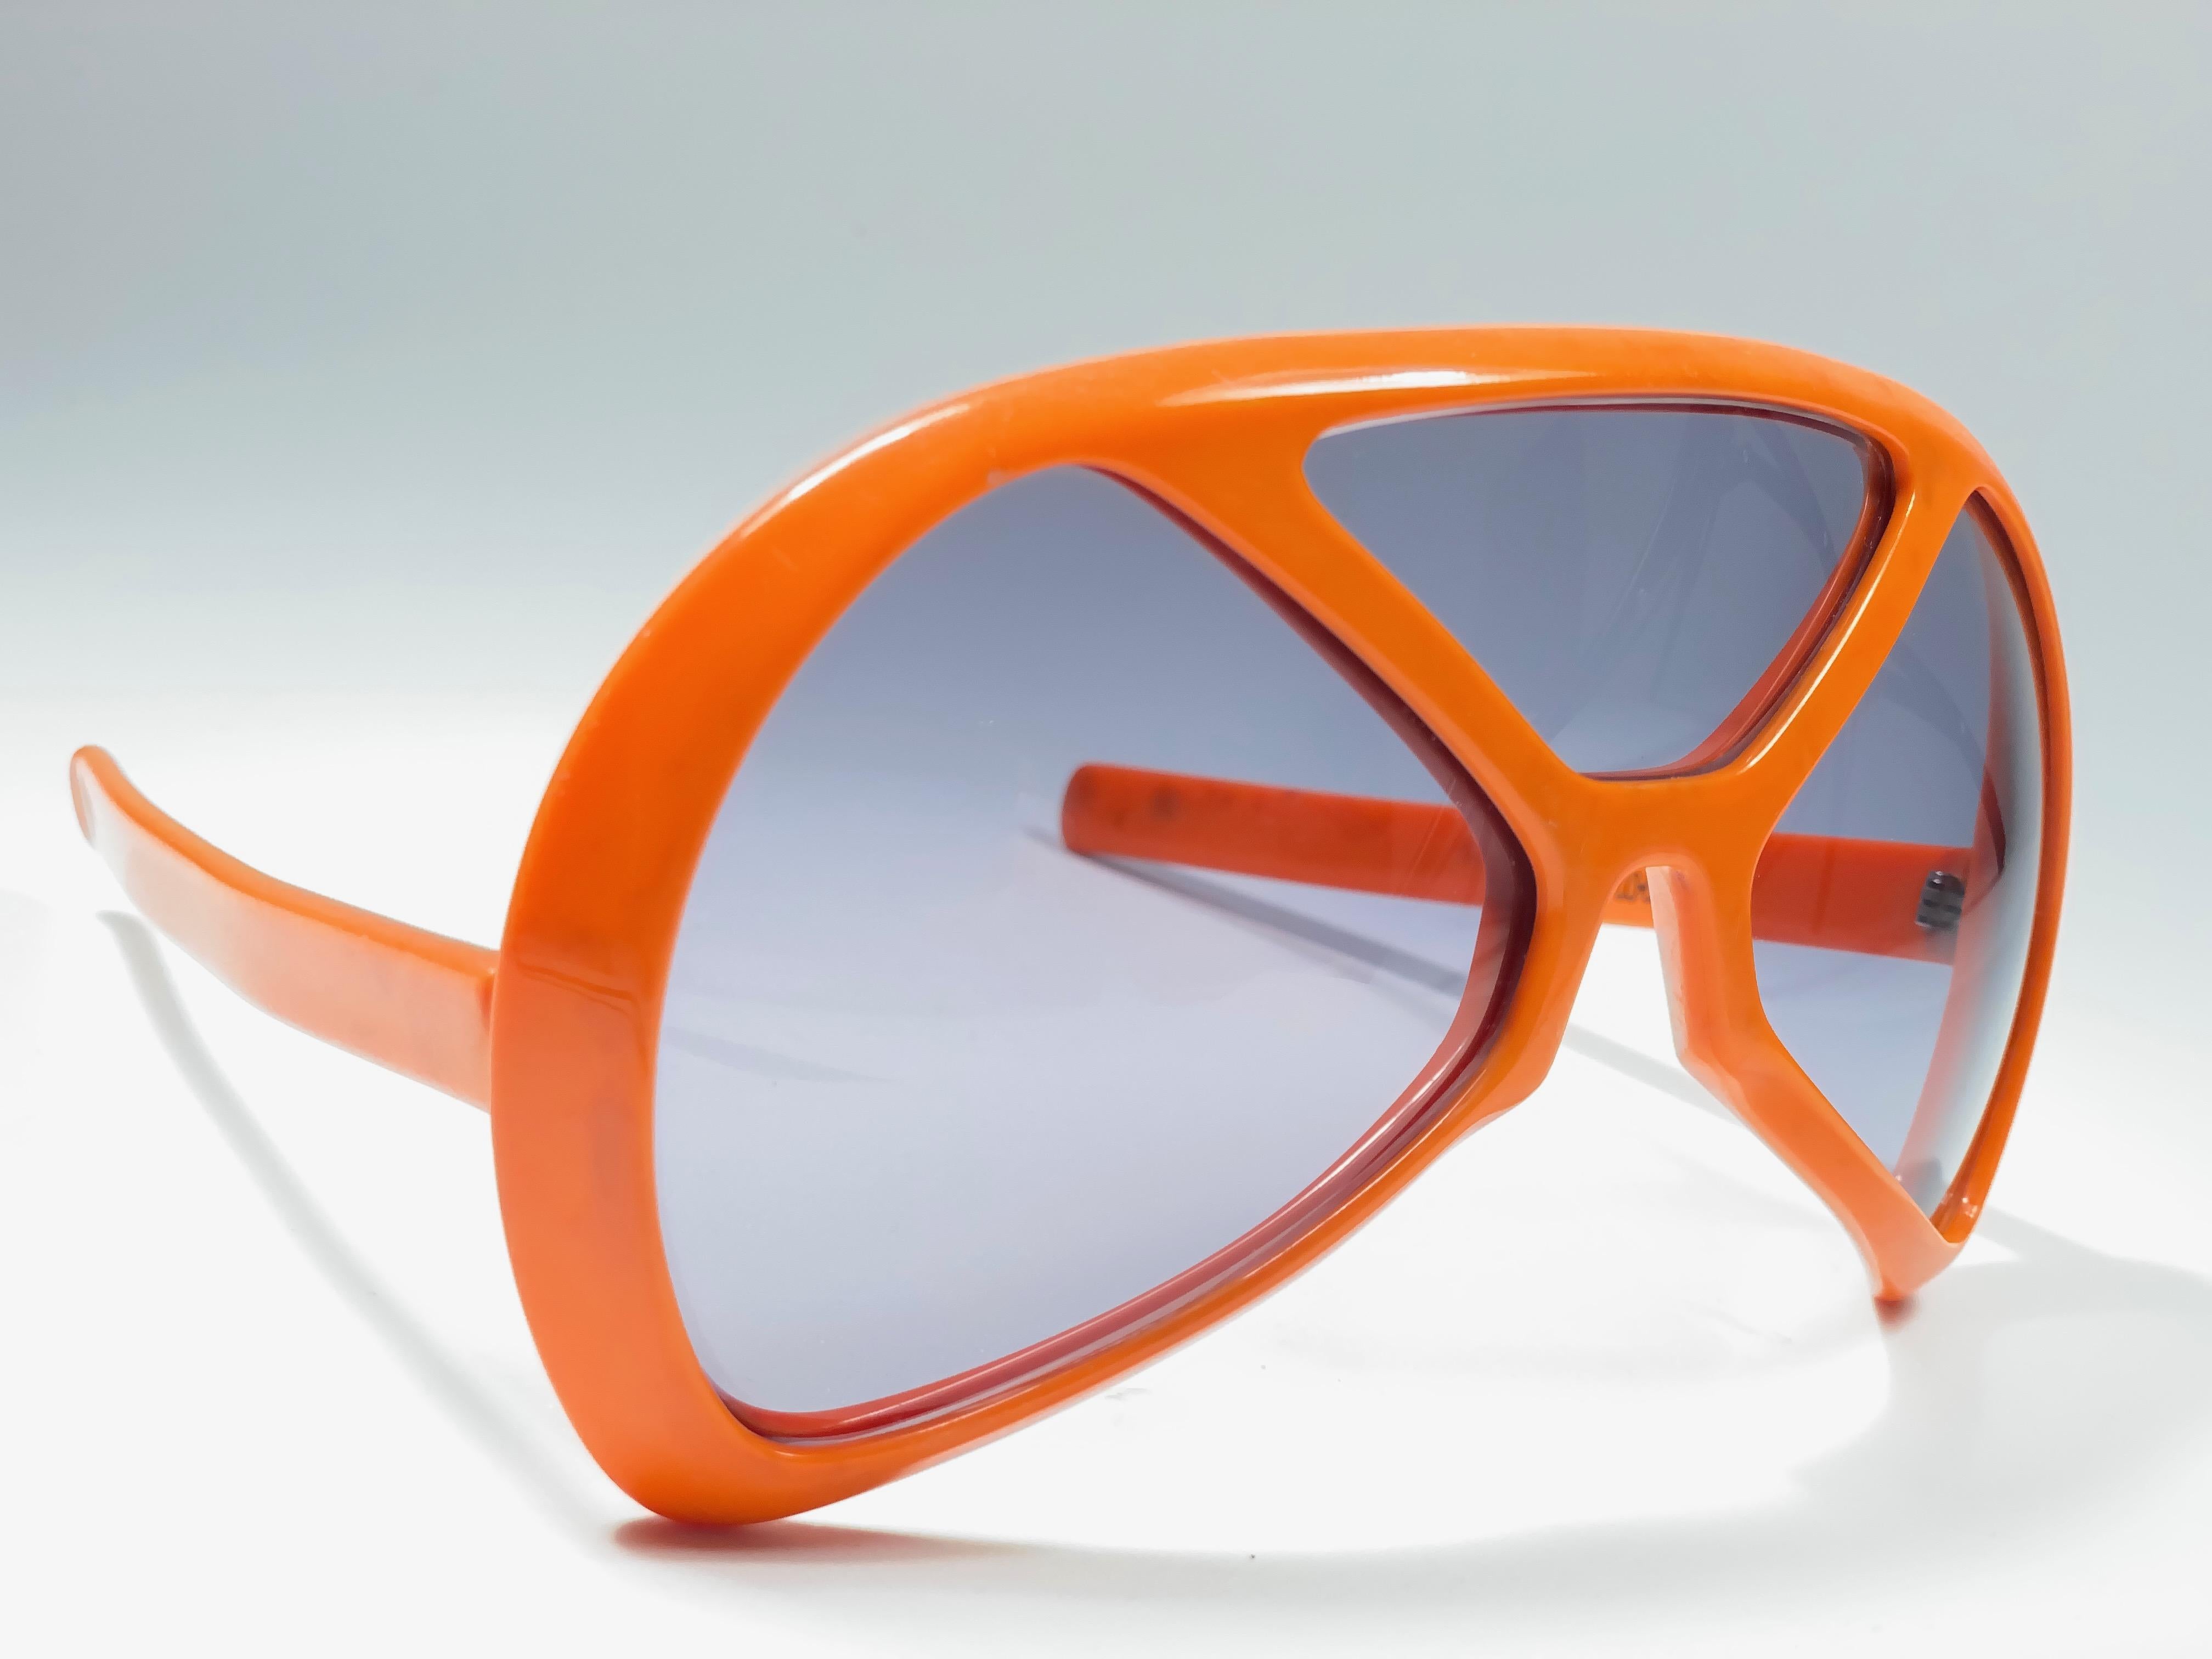 Mint Vintage Collector Item Silhouette Futura 570 in vibrant orange.

Designed by Dora Demmel in 1973, this rare piece is the epitome of avant garde & futuristic eye wear fashion.

Made in Germany in 1970's.

This item have darkened spots and light